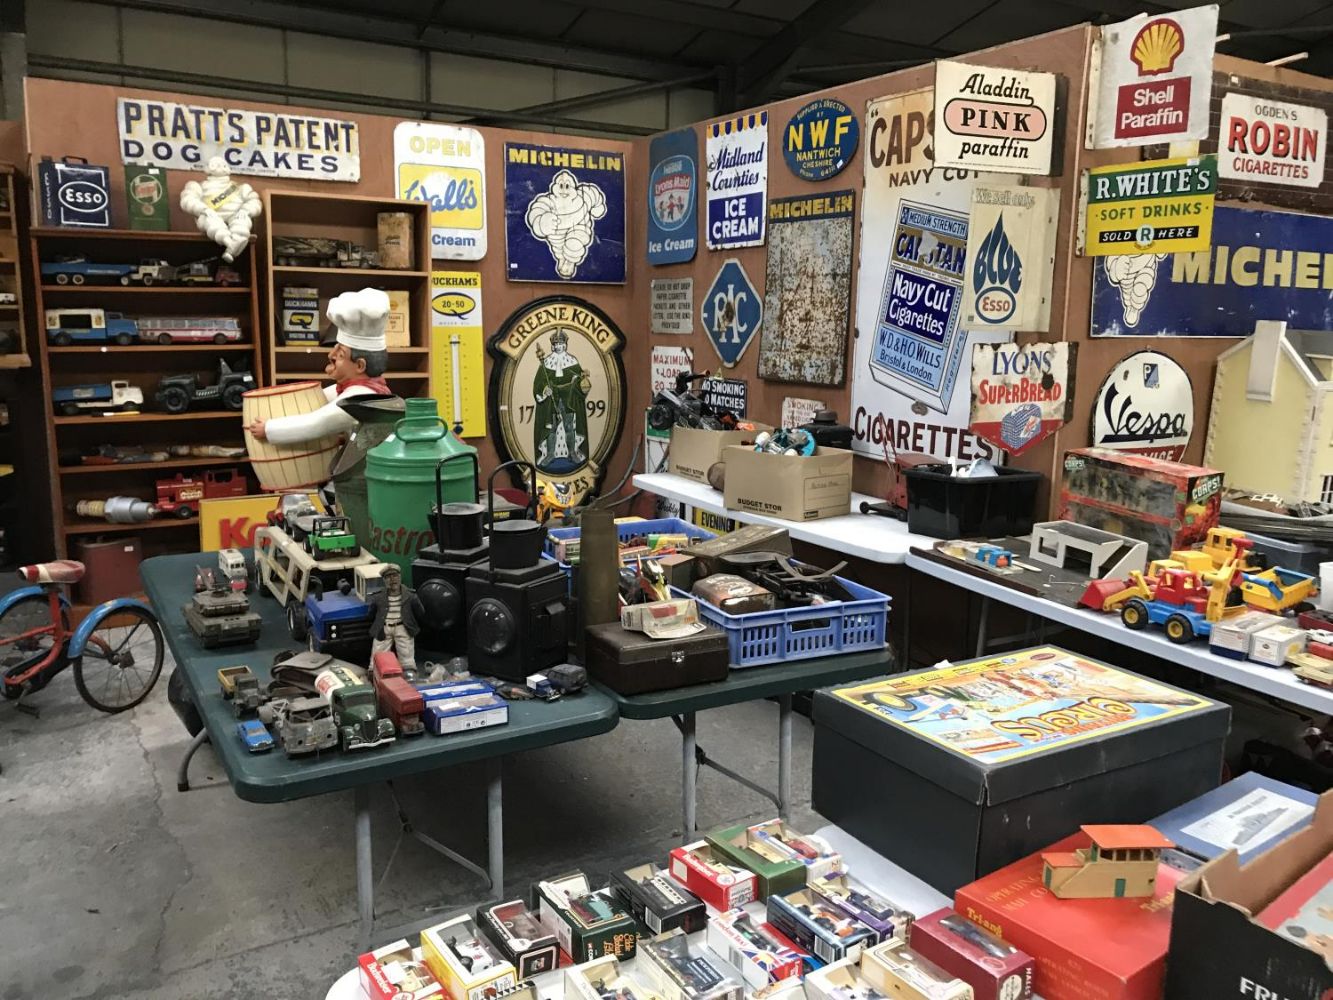 TWO DAY AUCTION OF COLLECTABLES, ANTIQUES, JEWELLERY, FURNITURE, VINTAGE ITEMS, TOOLS ETC. INCLUDING A SPECIAL SALE OF COLLECTABLE CERAMICS